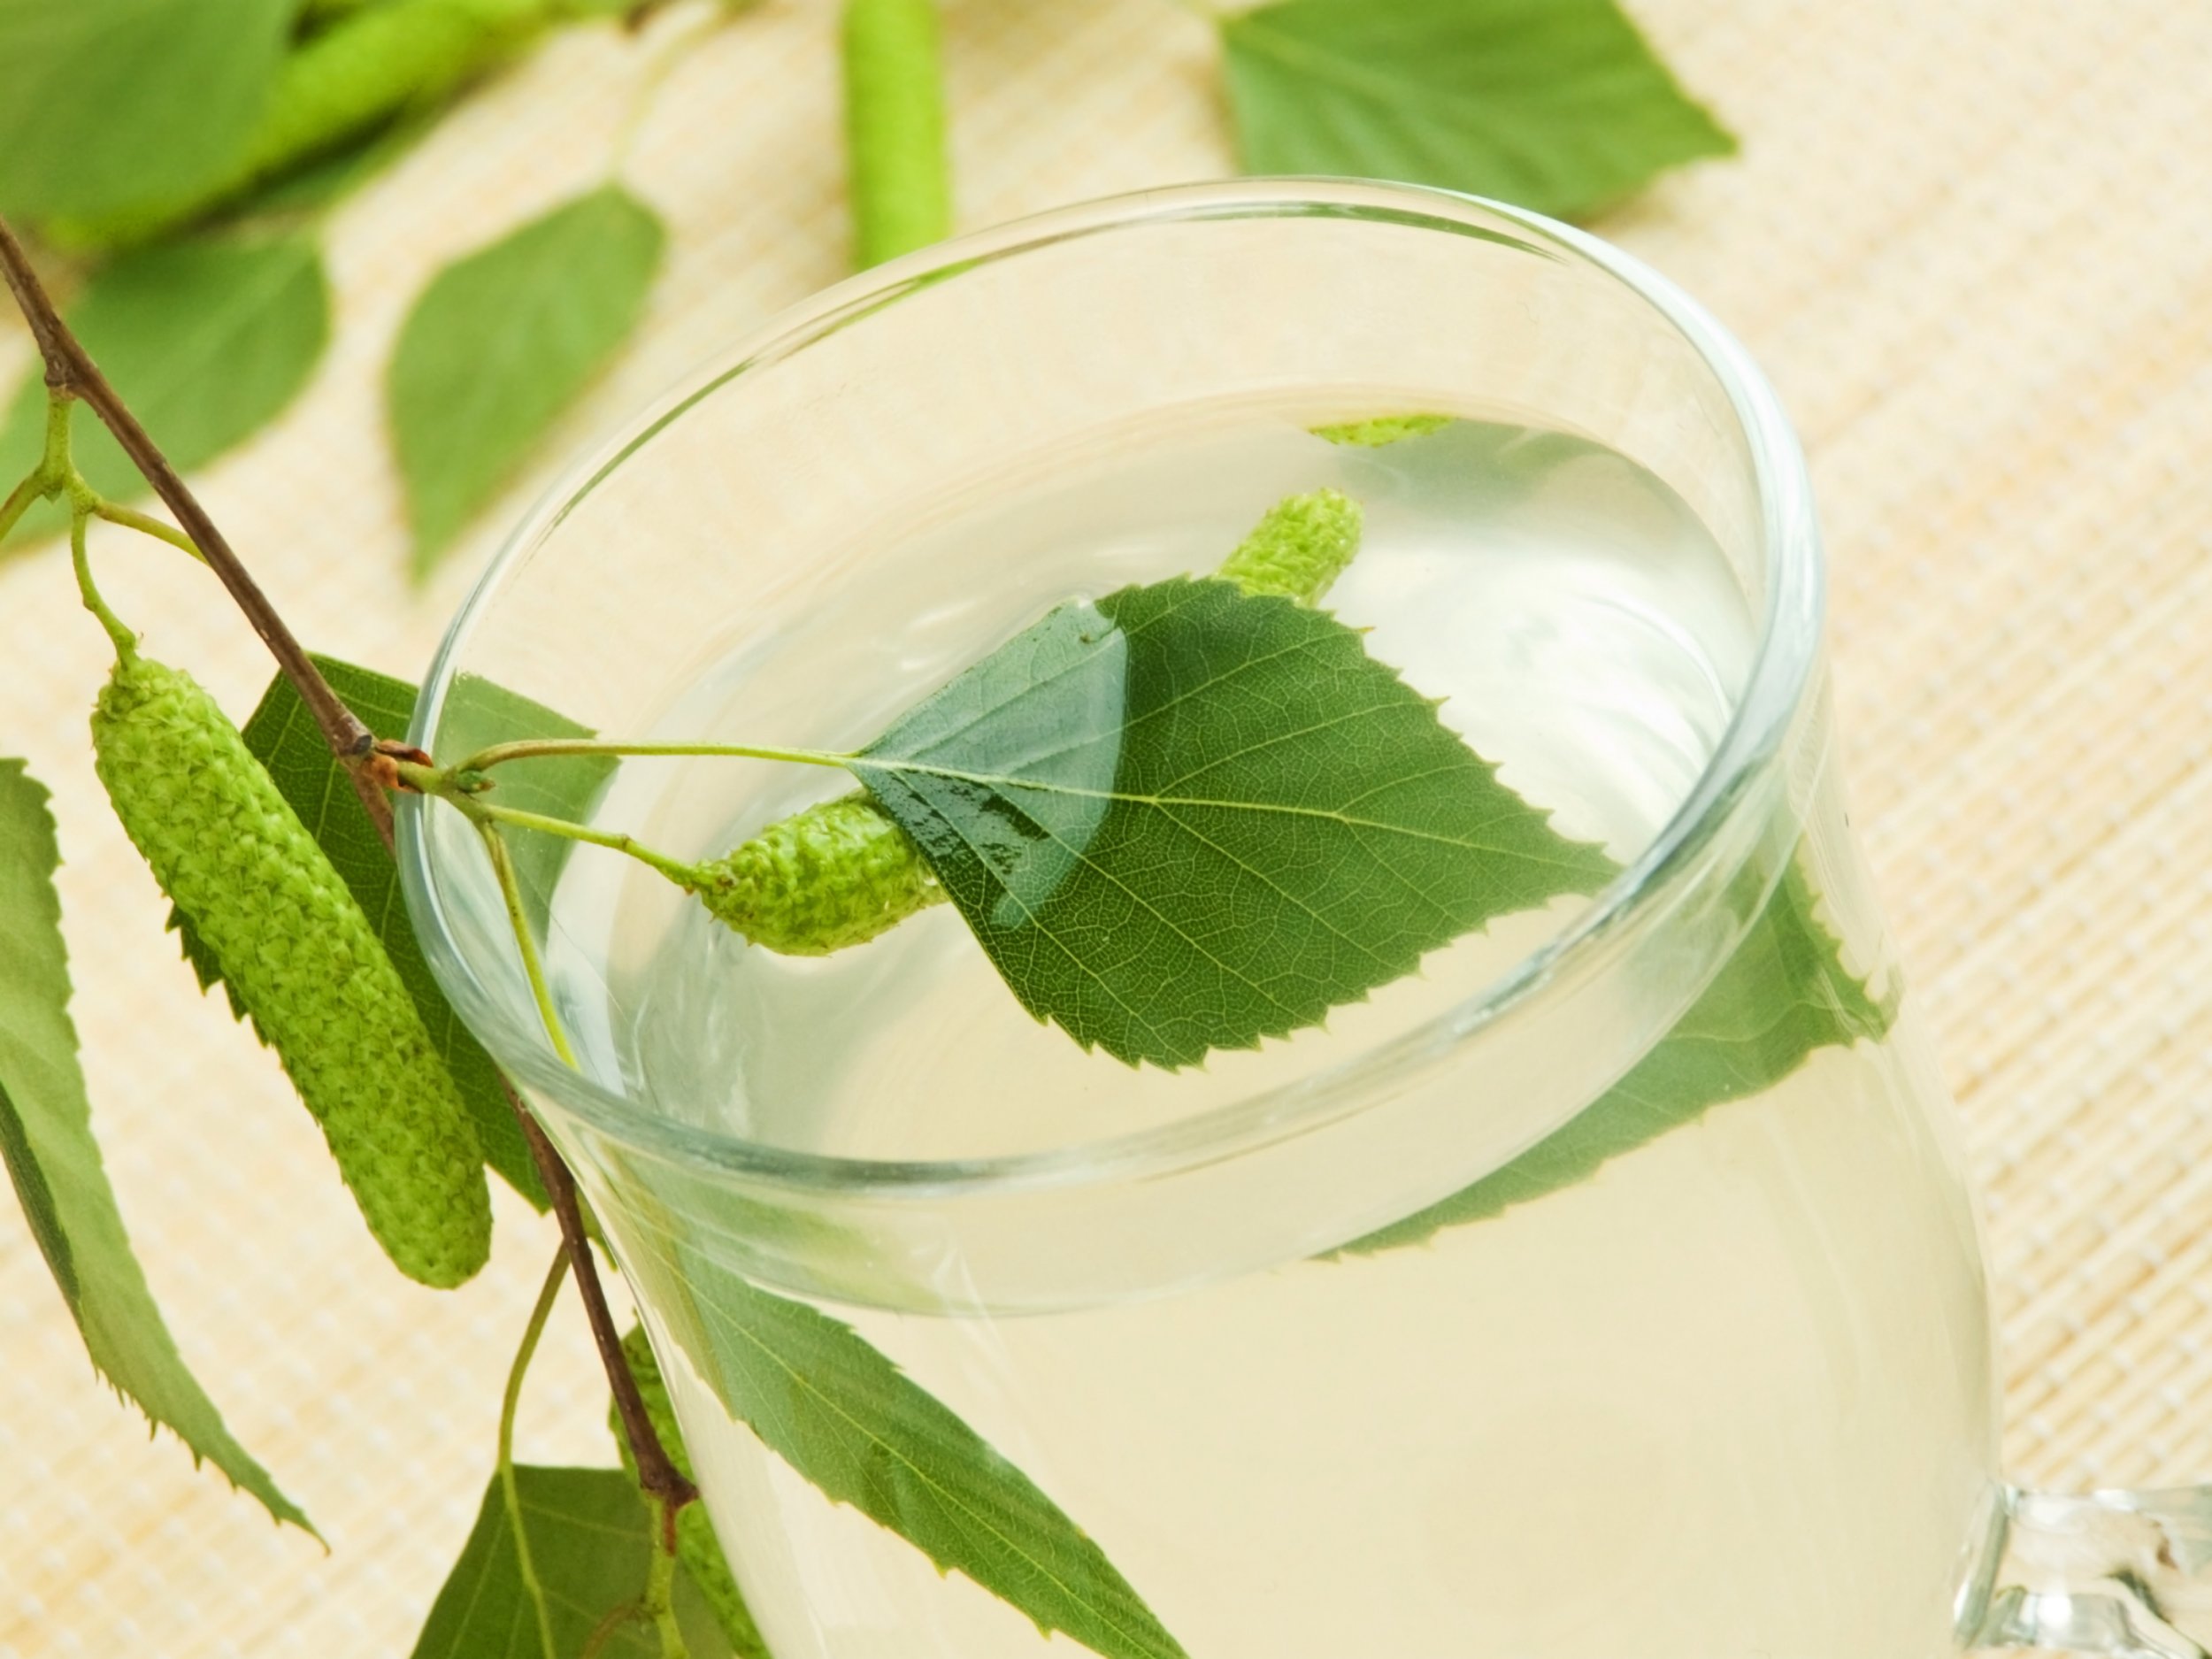 Birch Water Benefits - Have You Heard of Birch Water for Detox?